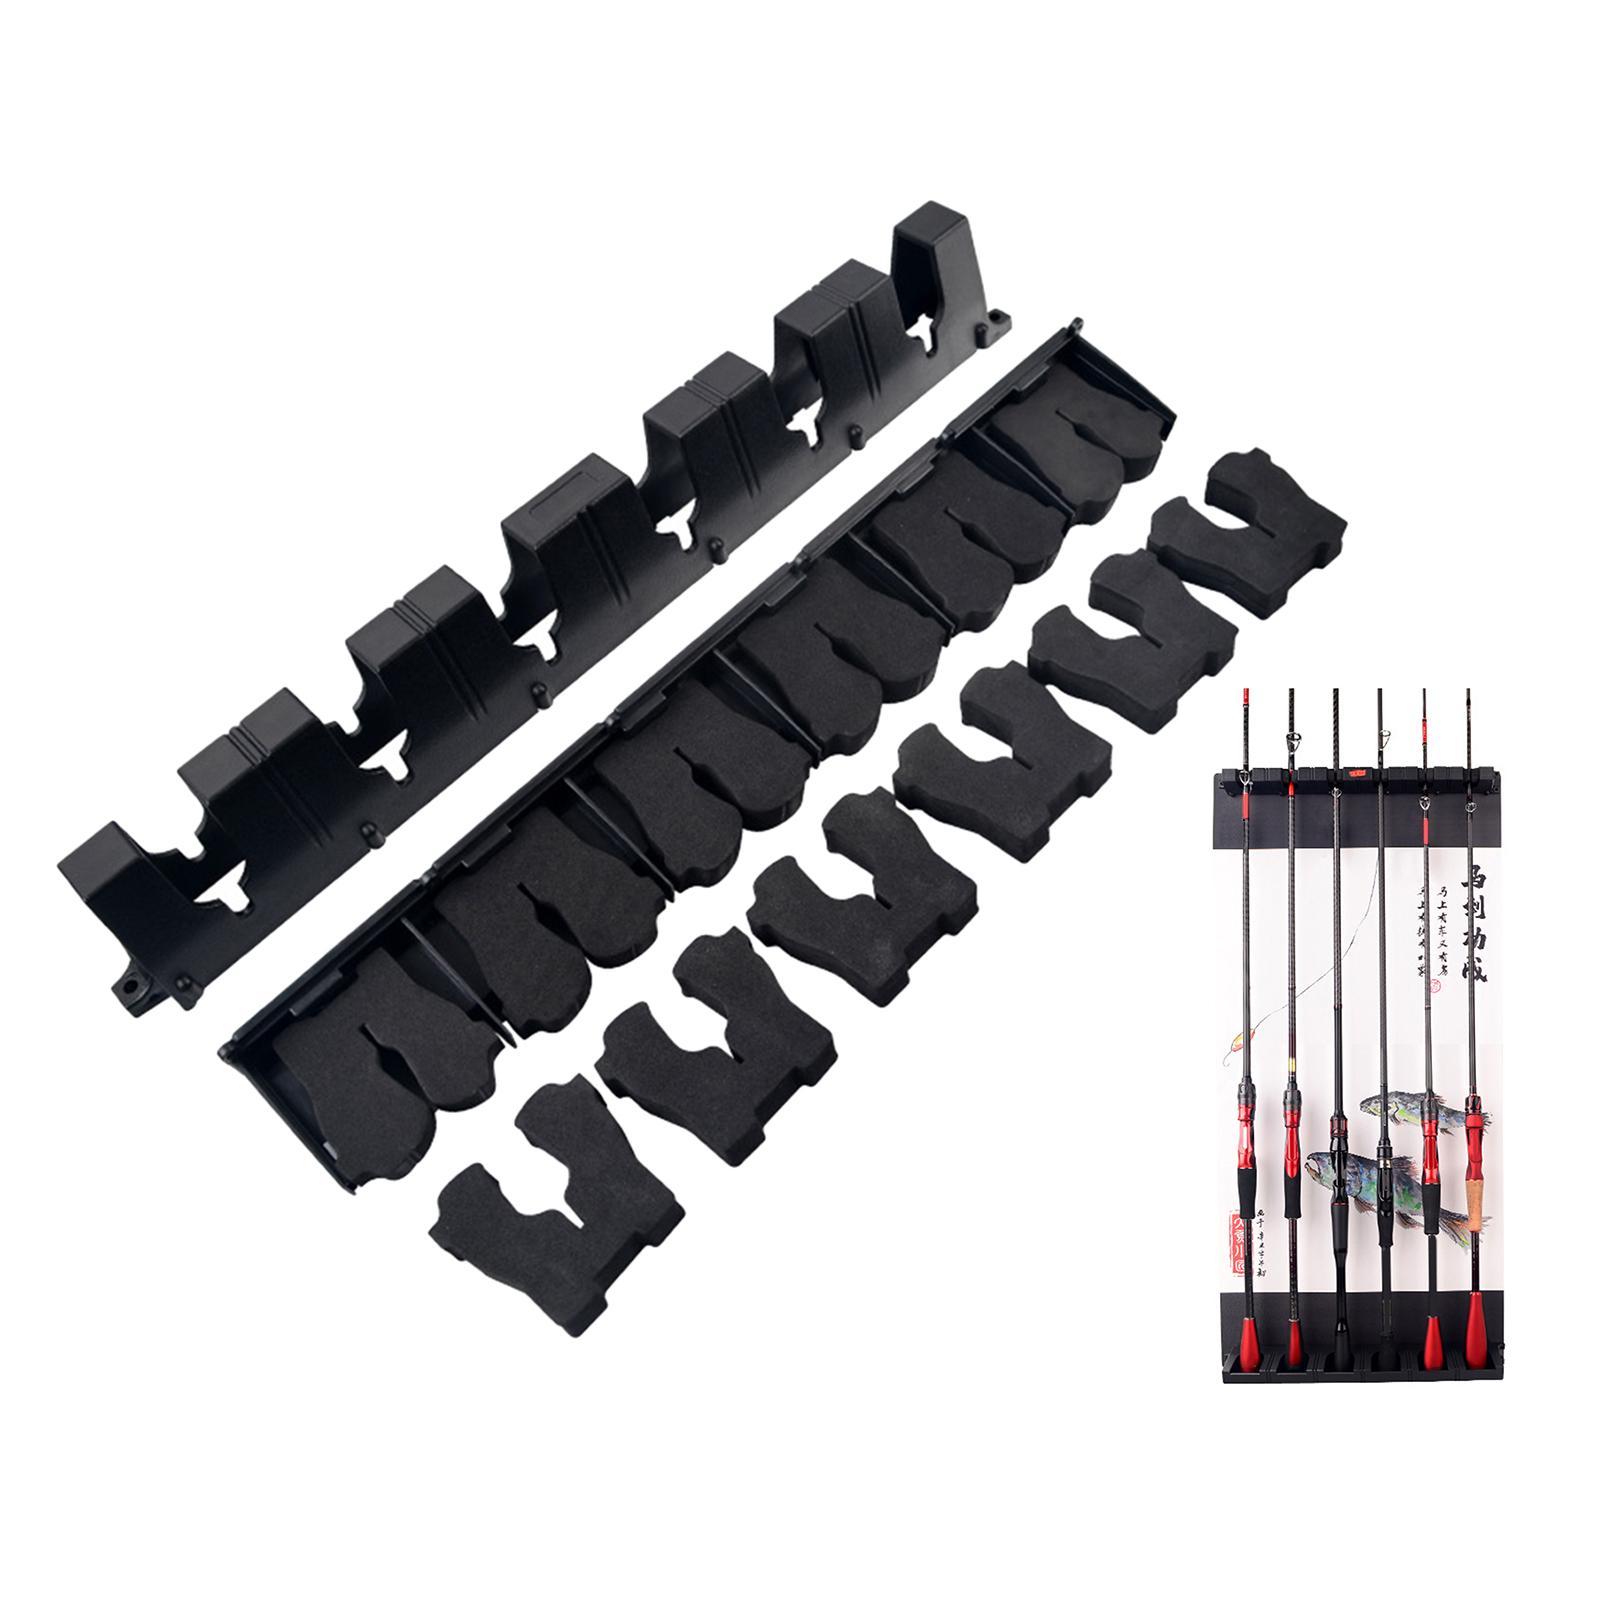 Fishing Rod Rack Stable Wall Mount for Basement Outdoor Shop Boat Stand Organizer